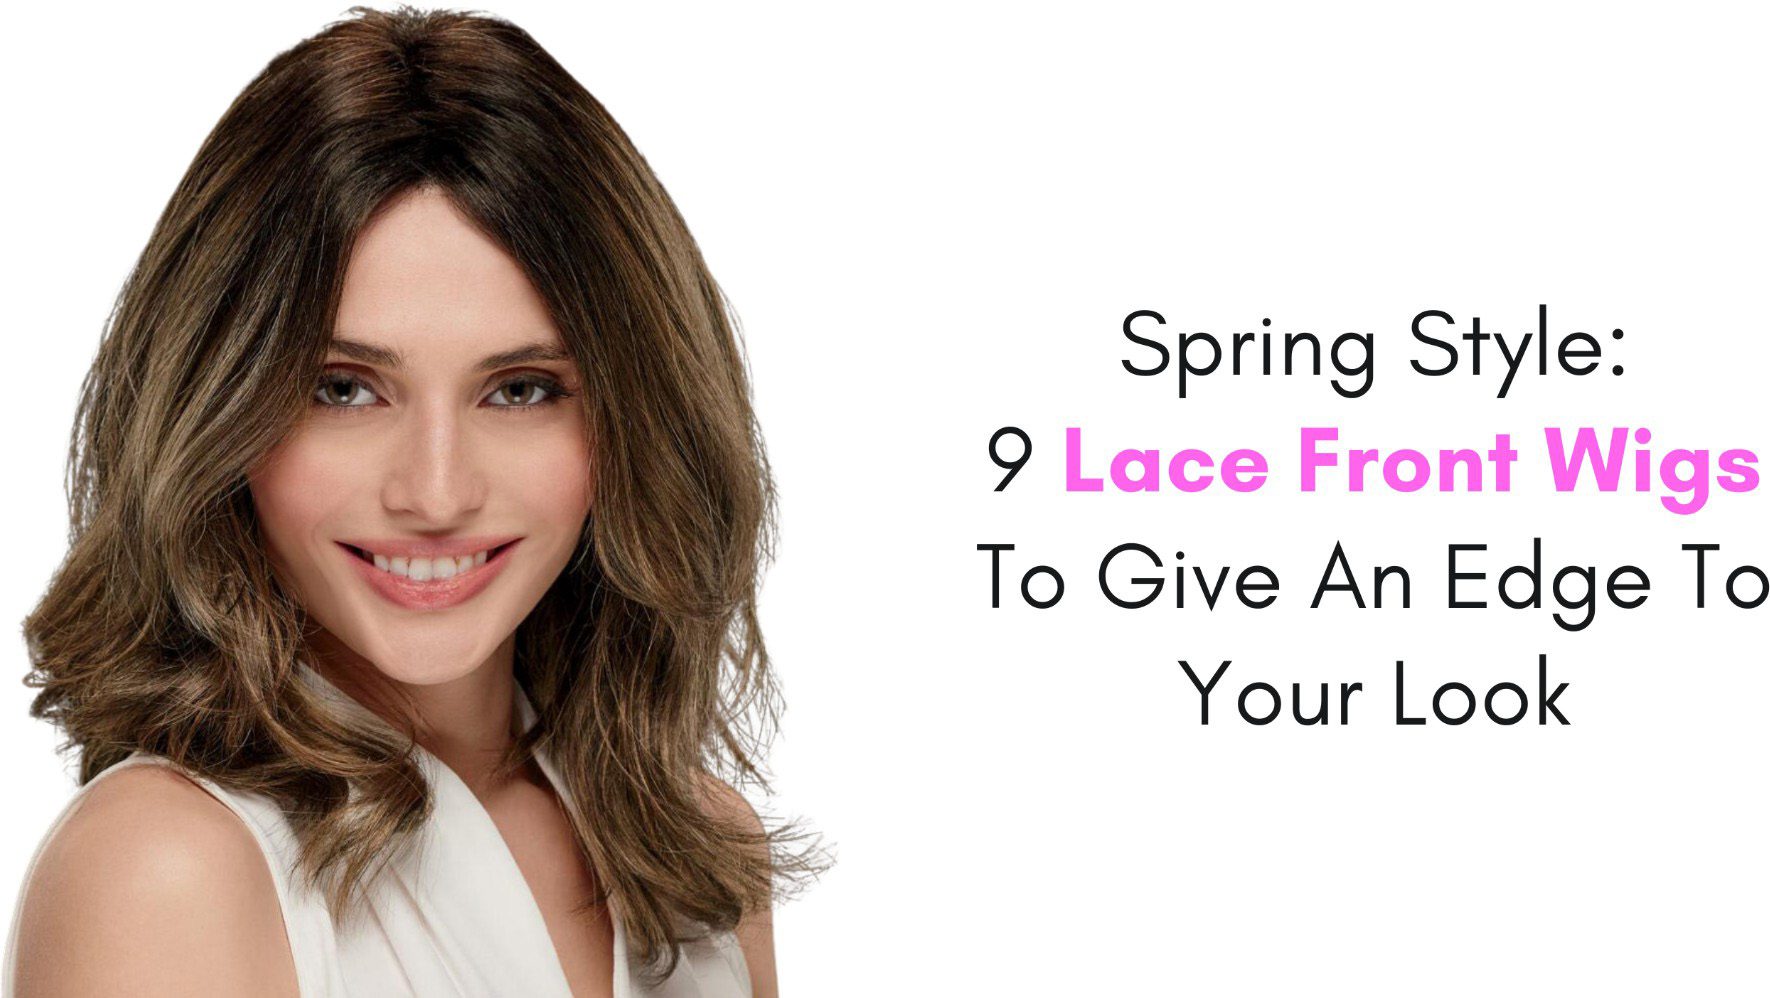 spring style 9 lace front wigs to give an edge to your look